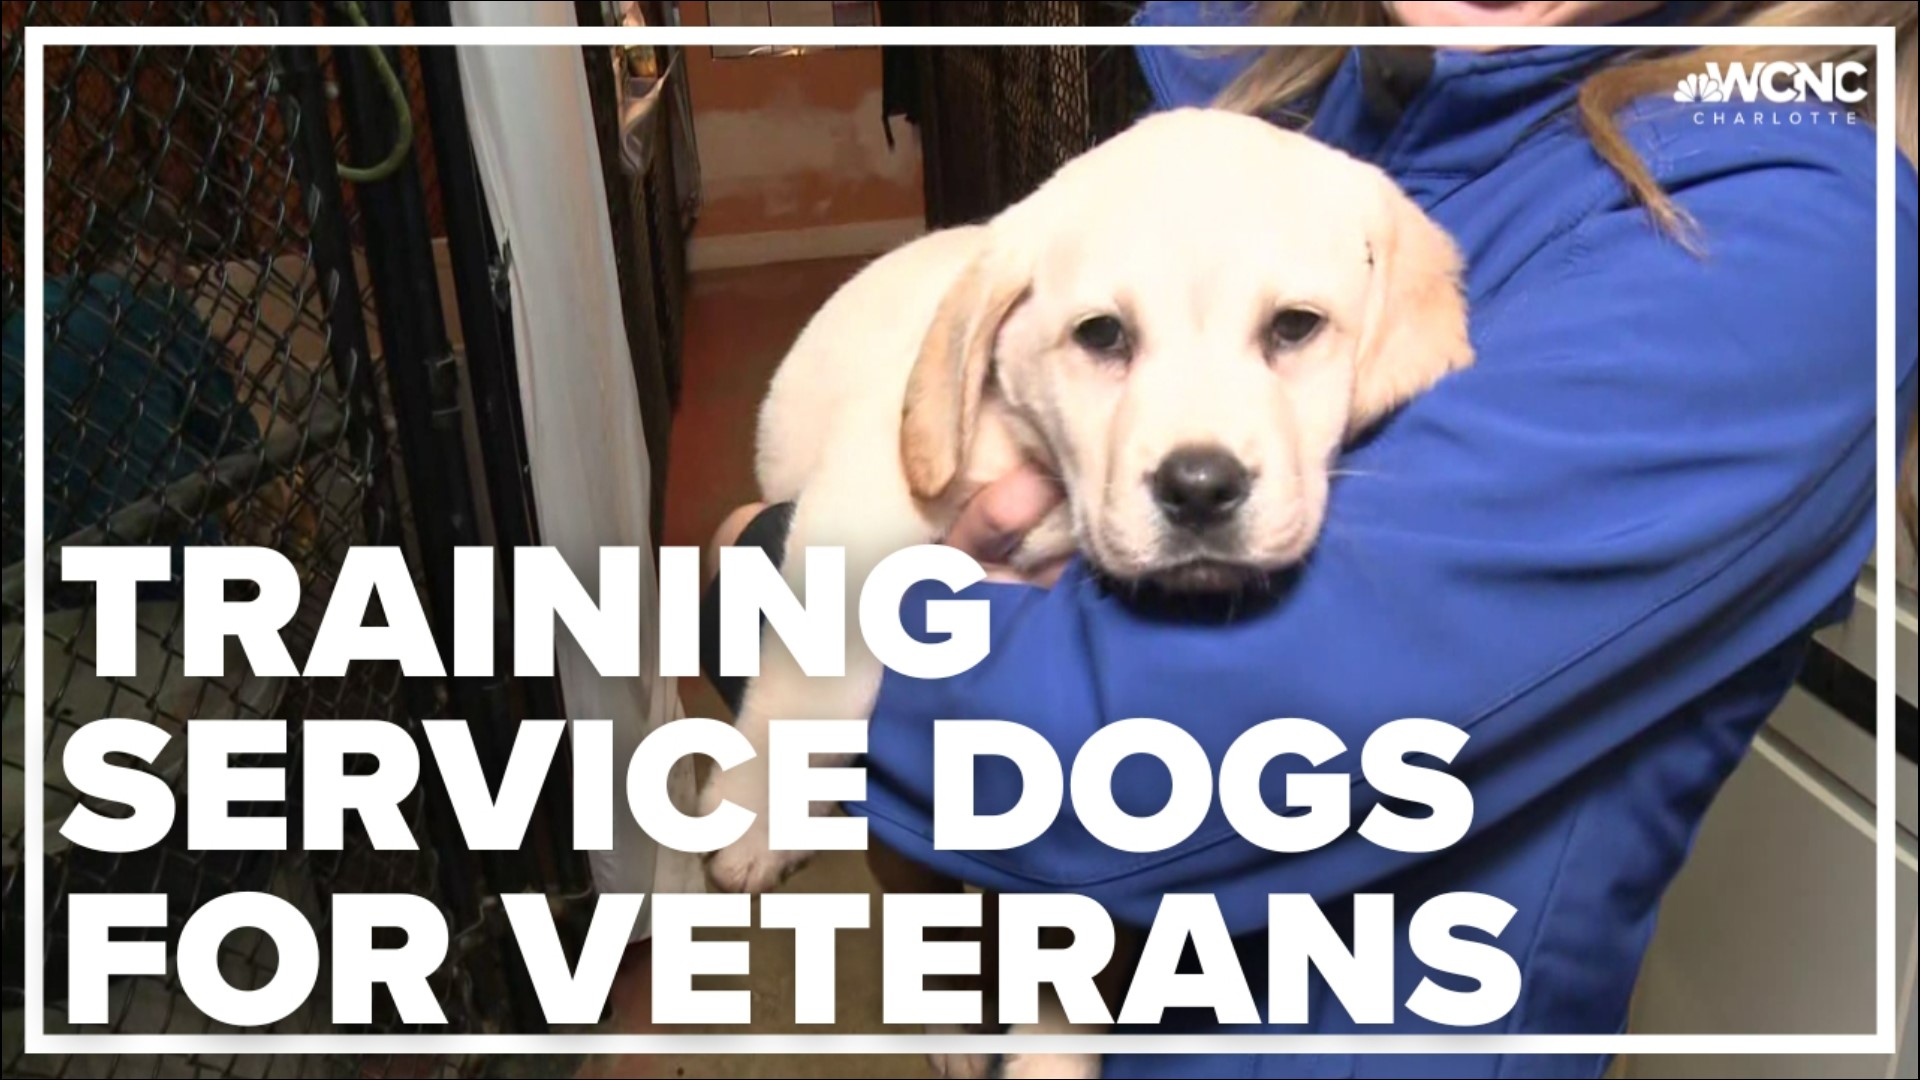 Each litter of puppies is training to help veterans with disabilities, but the animals can be hard to train and few are available.